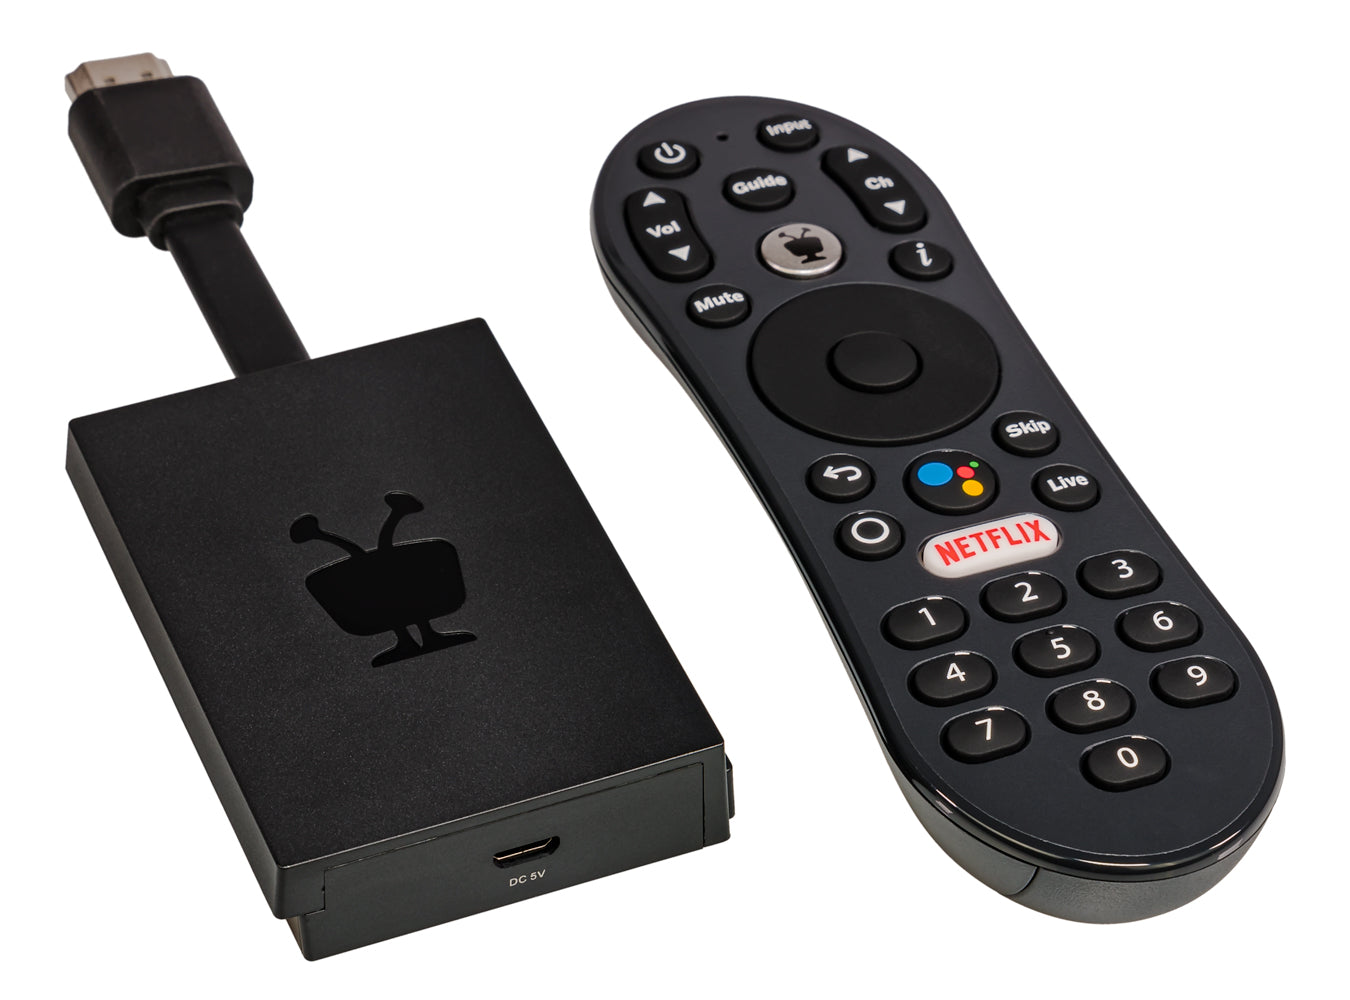 TiVo Stream 4K UHD Streaming Media Player with Google Assistance